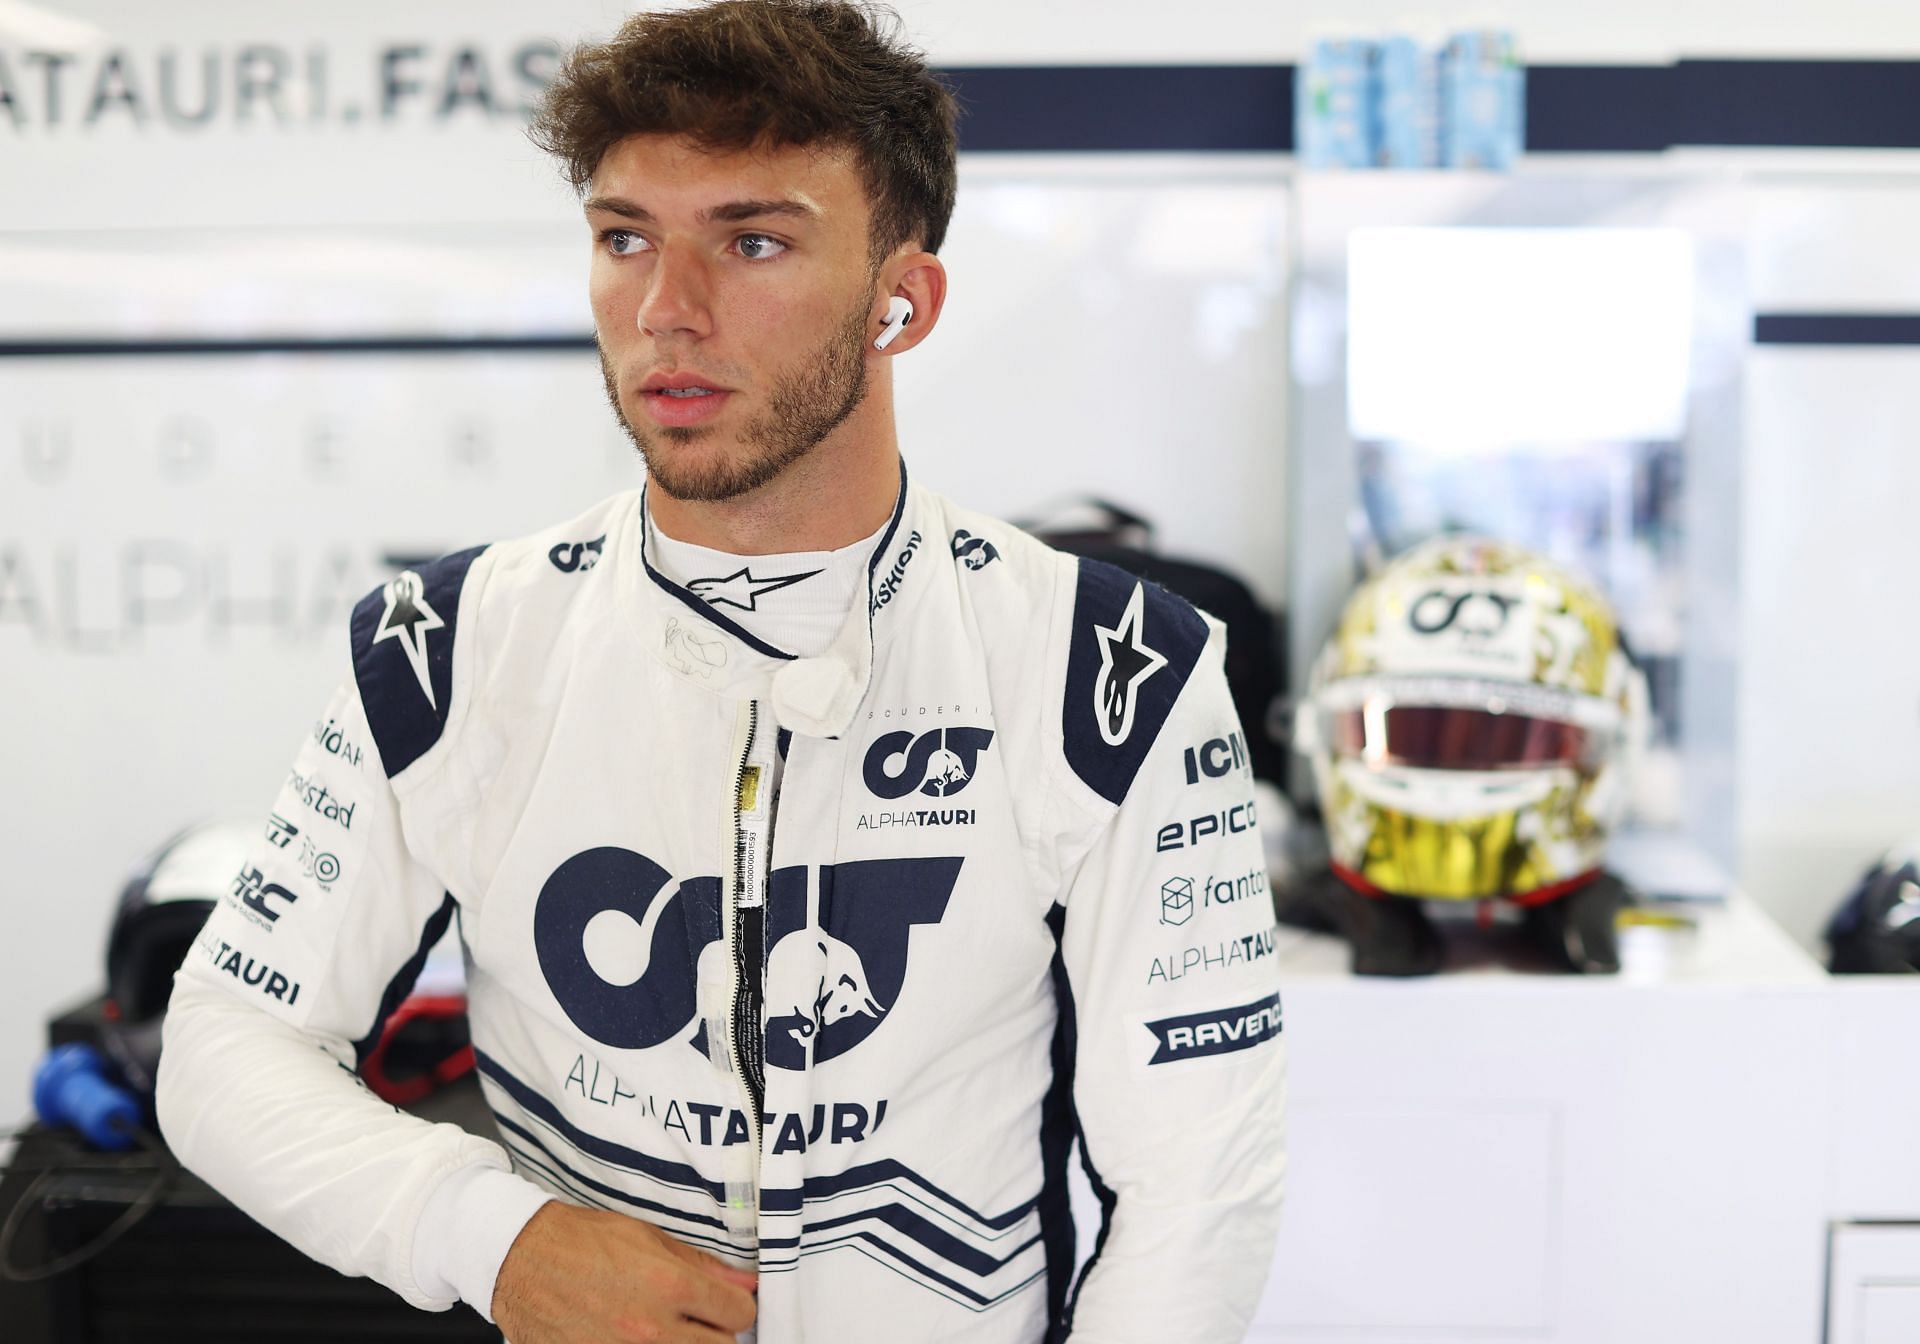 AlphaTauri driver Pierre Gasly ahead of the 2022 F1 Monaco GP (Photo by Peter Fox/Getty Images)